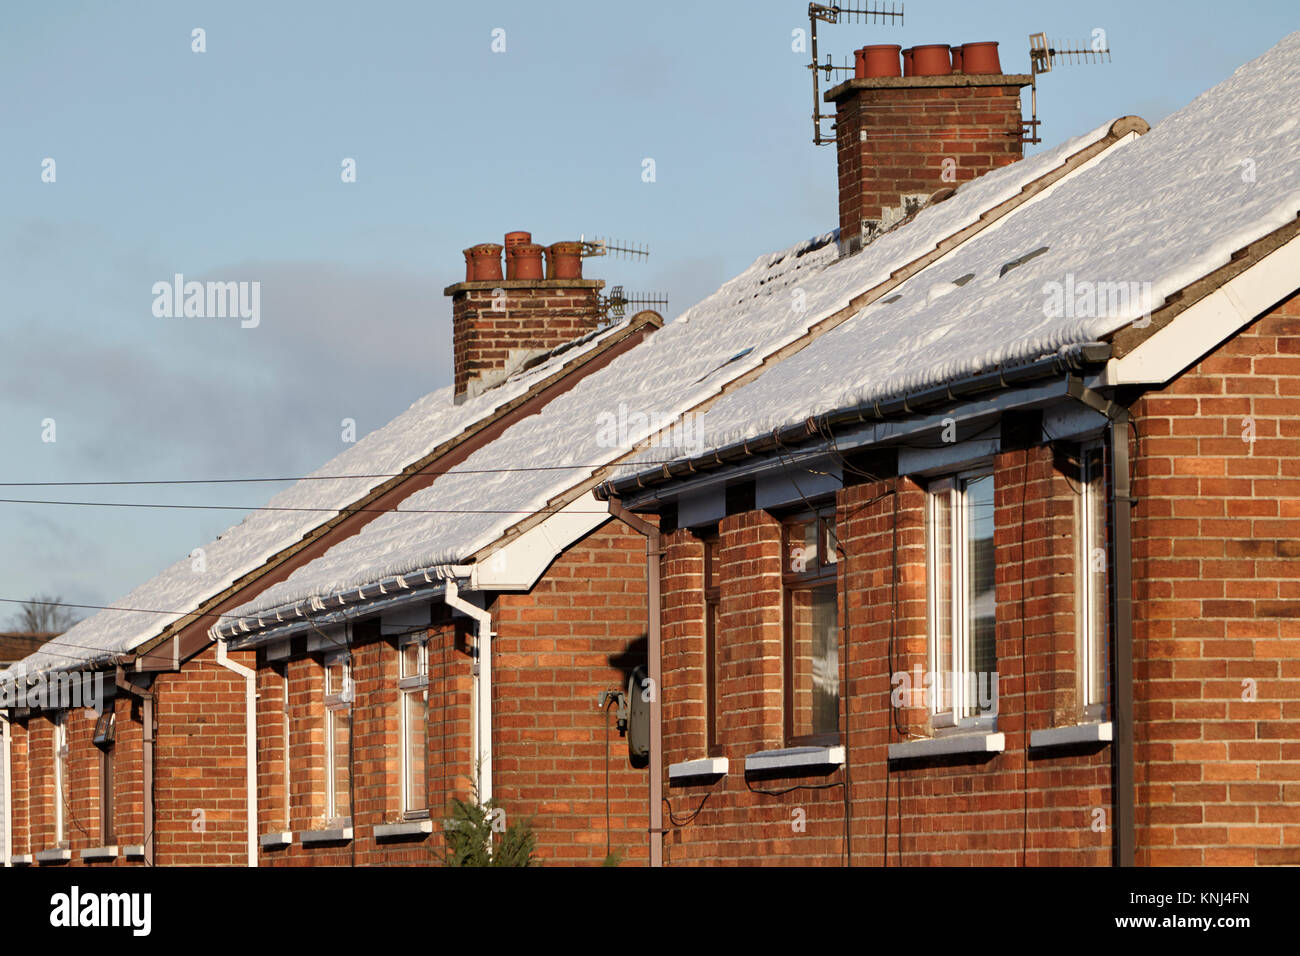 snow covered rooves of older housing stock newtownabbey northern ireland uk Stock Photo